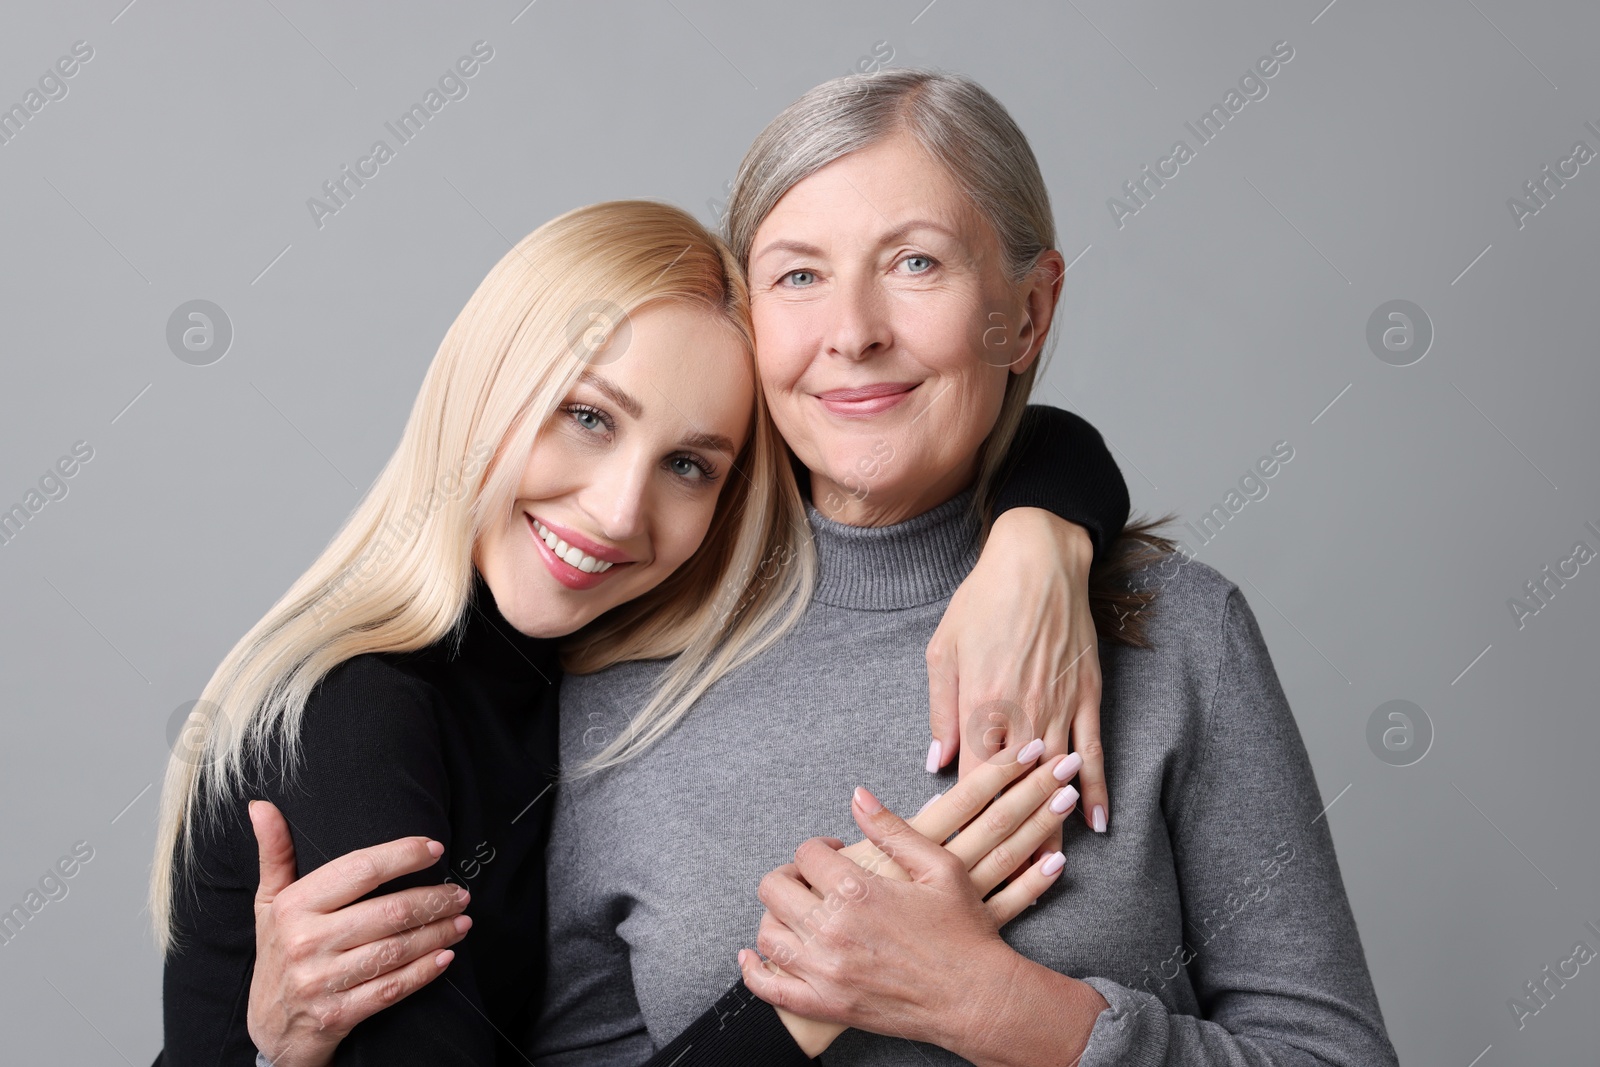 Photo of Family portrait of young woman and her mother on grey background